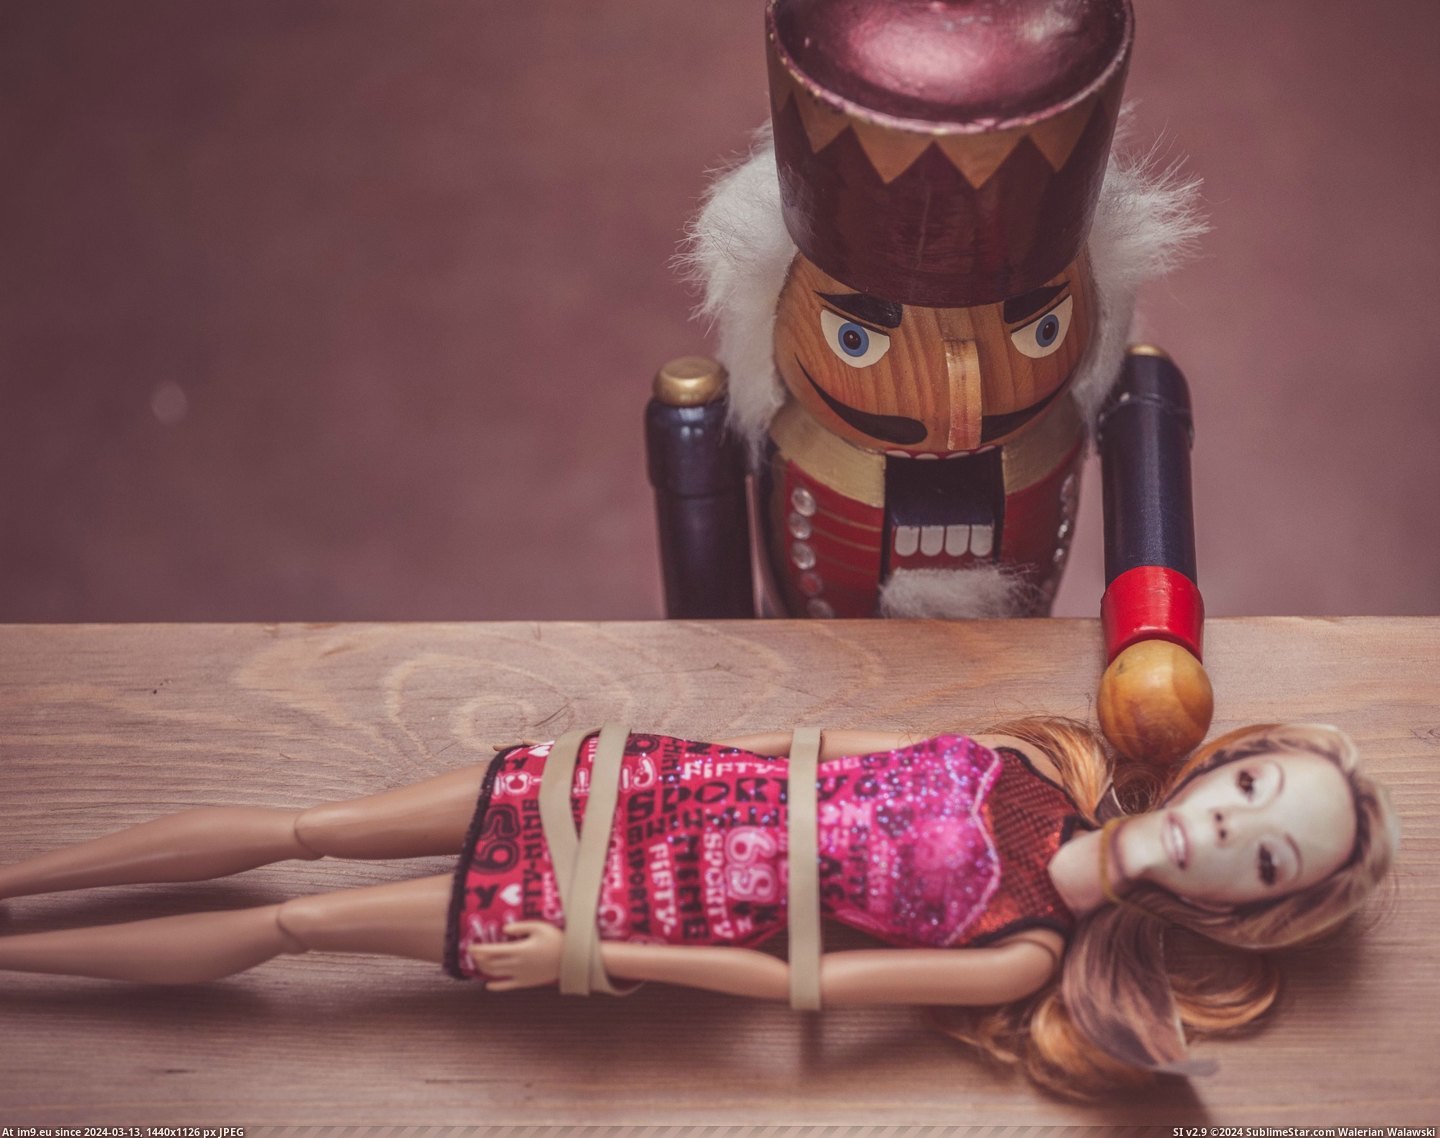 #For #Year #Friend #Stole #Nutcracker #Christmas #Amazing #Got [Pics] Last Christmas I stole my friend's nutcracker - this year, he got these back: 'most amazing thing anyone has done for me  Pic. (Изображение из альбом My r/PICS favs))